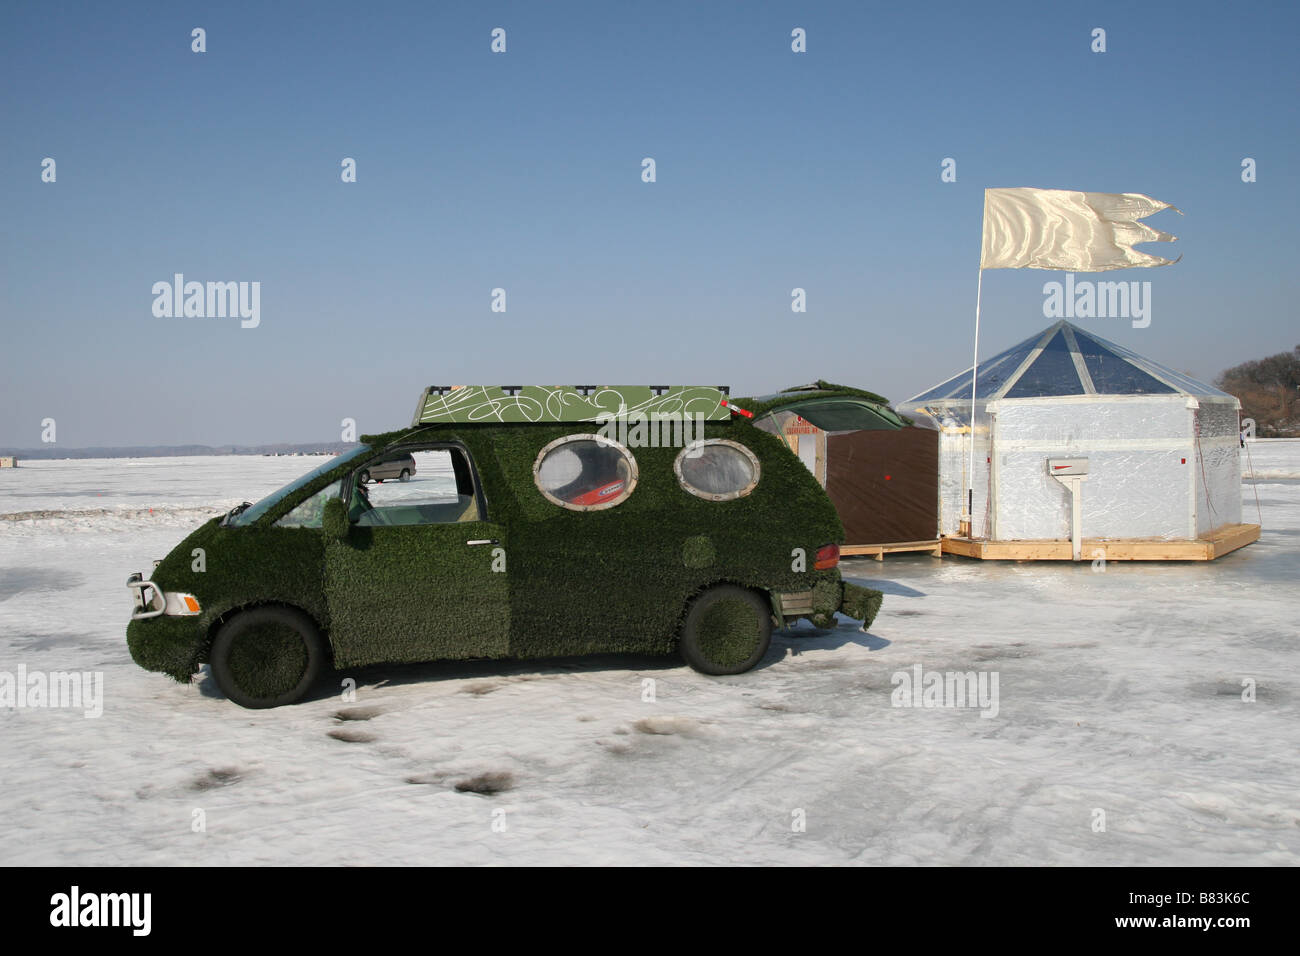 A car covered in turf at the Art Shanty Project in Minneapolis, Minnesota. Stock Photo